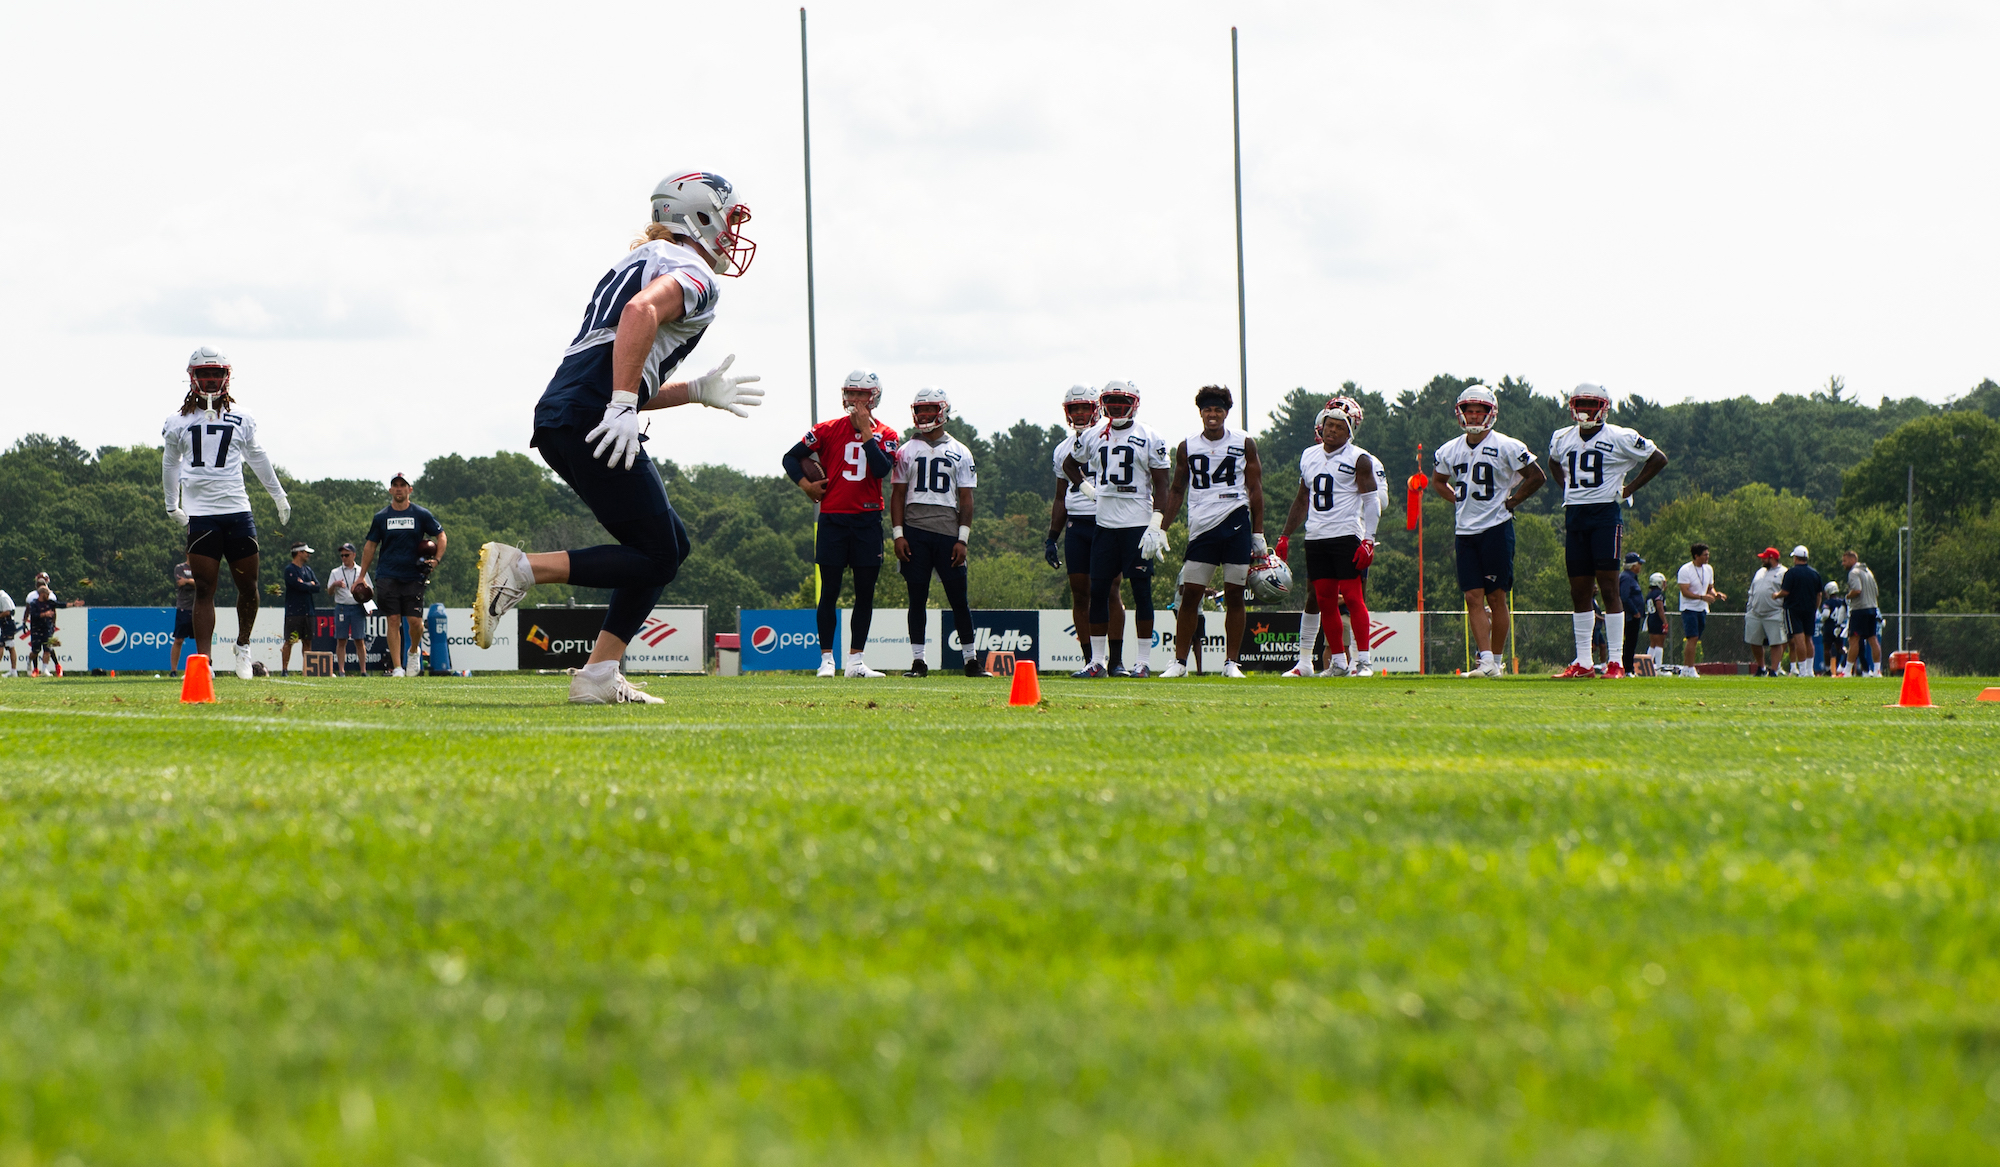 FOXBOROUGH, MA - JULY 29, 2021: Gunner Olszewski #80 of the New England Patriots performs a drill during training camp at Gillette Stadium on July 29, 2021 in Foxborough, Massachusetts. (Photo by Kathryn Riley/Getty Images)